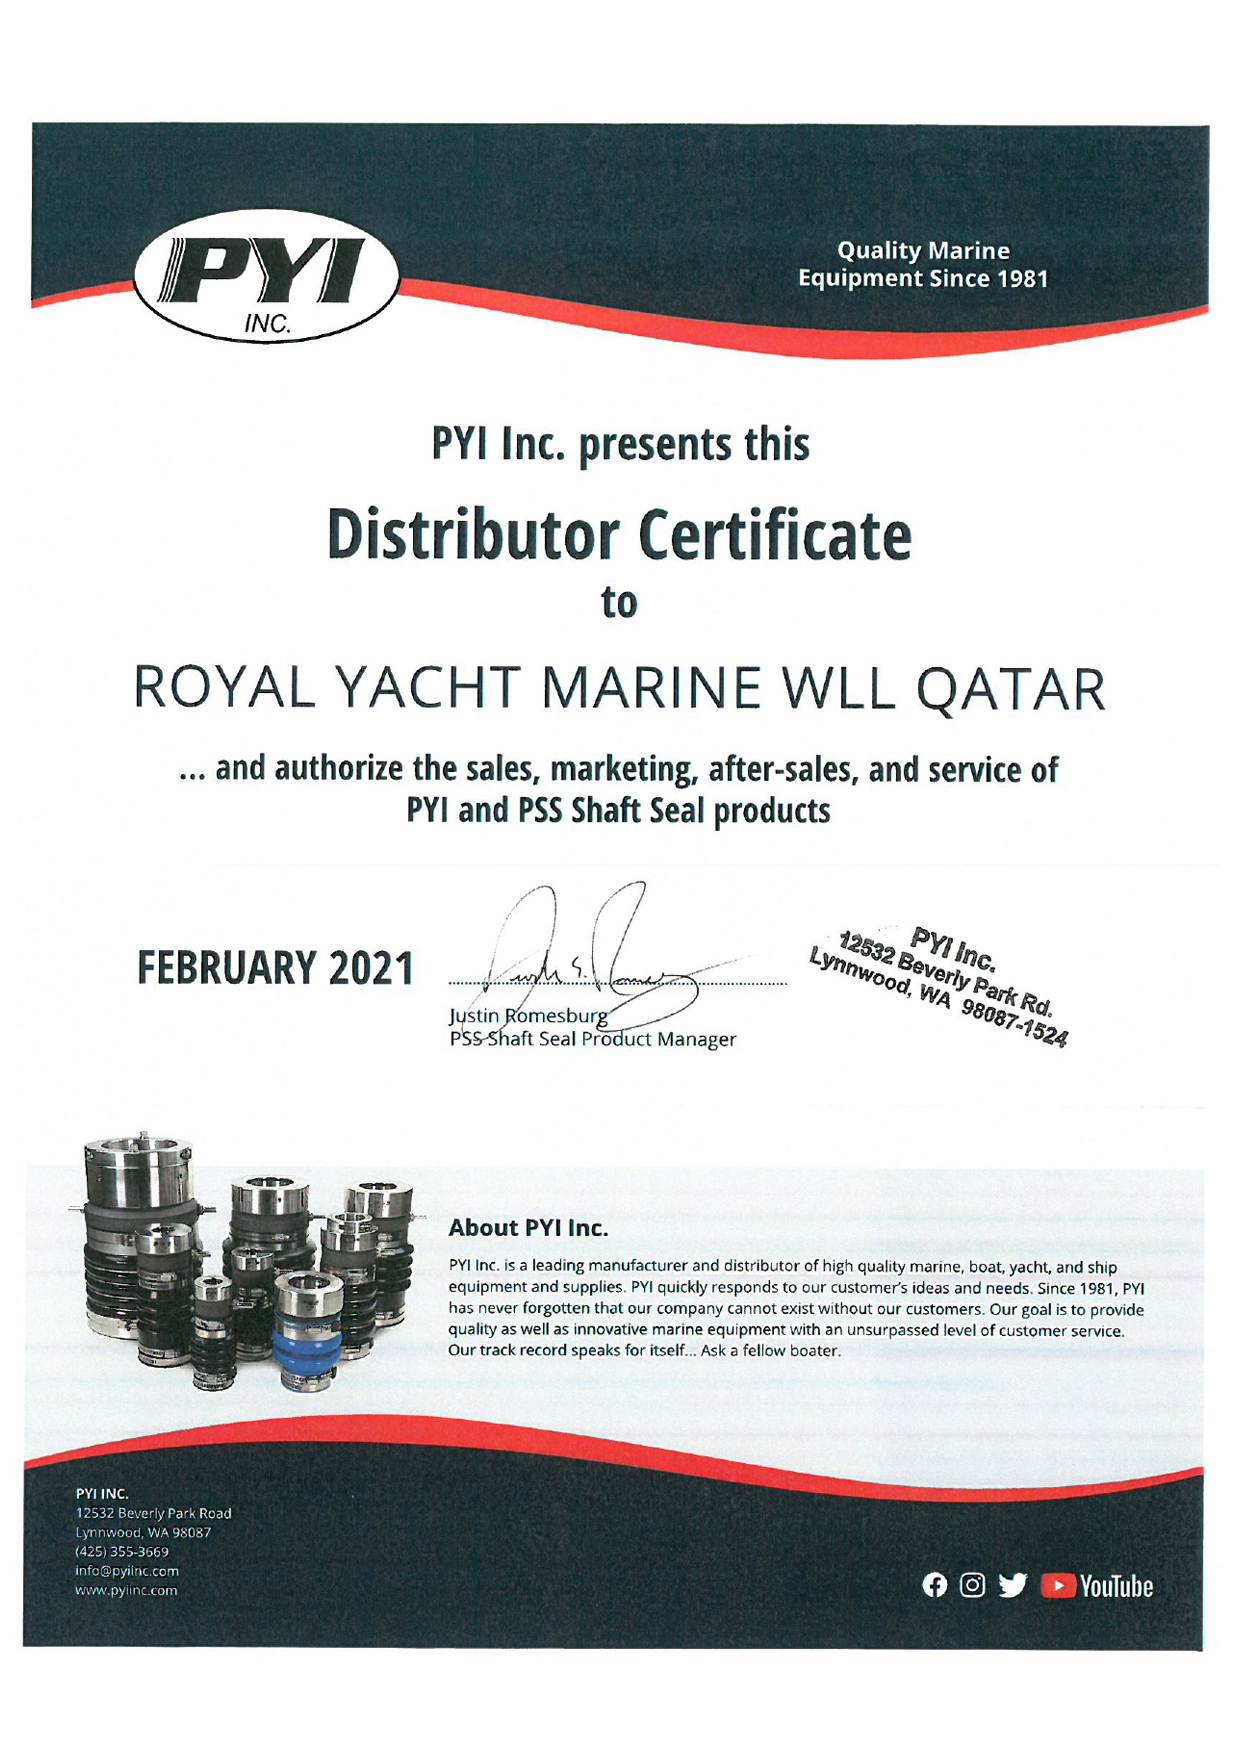 royal yacht certificate